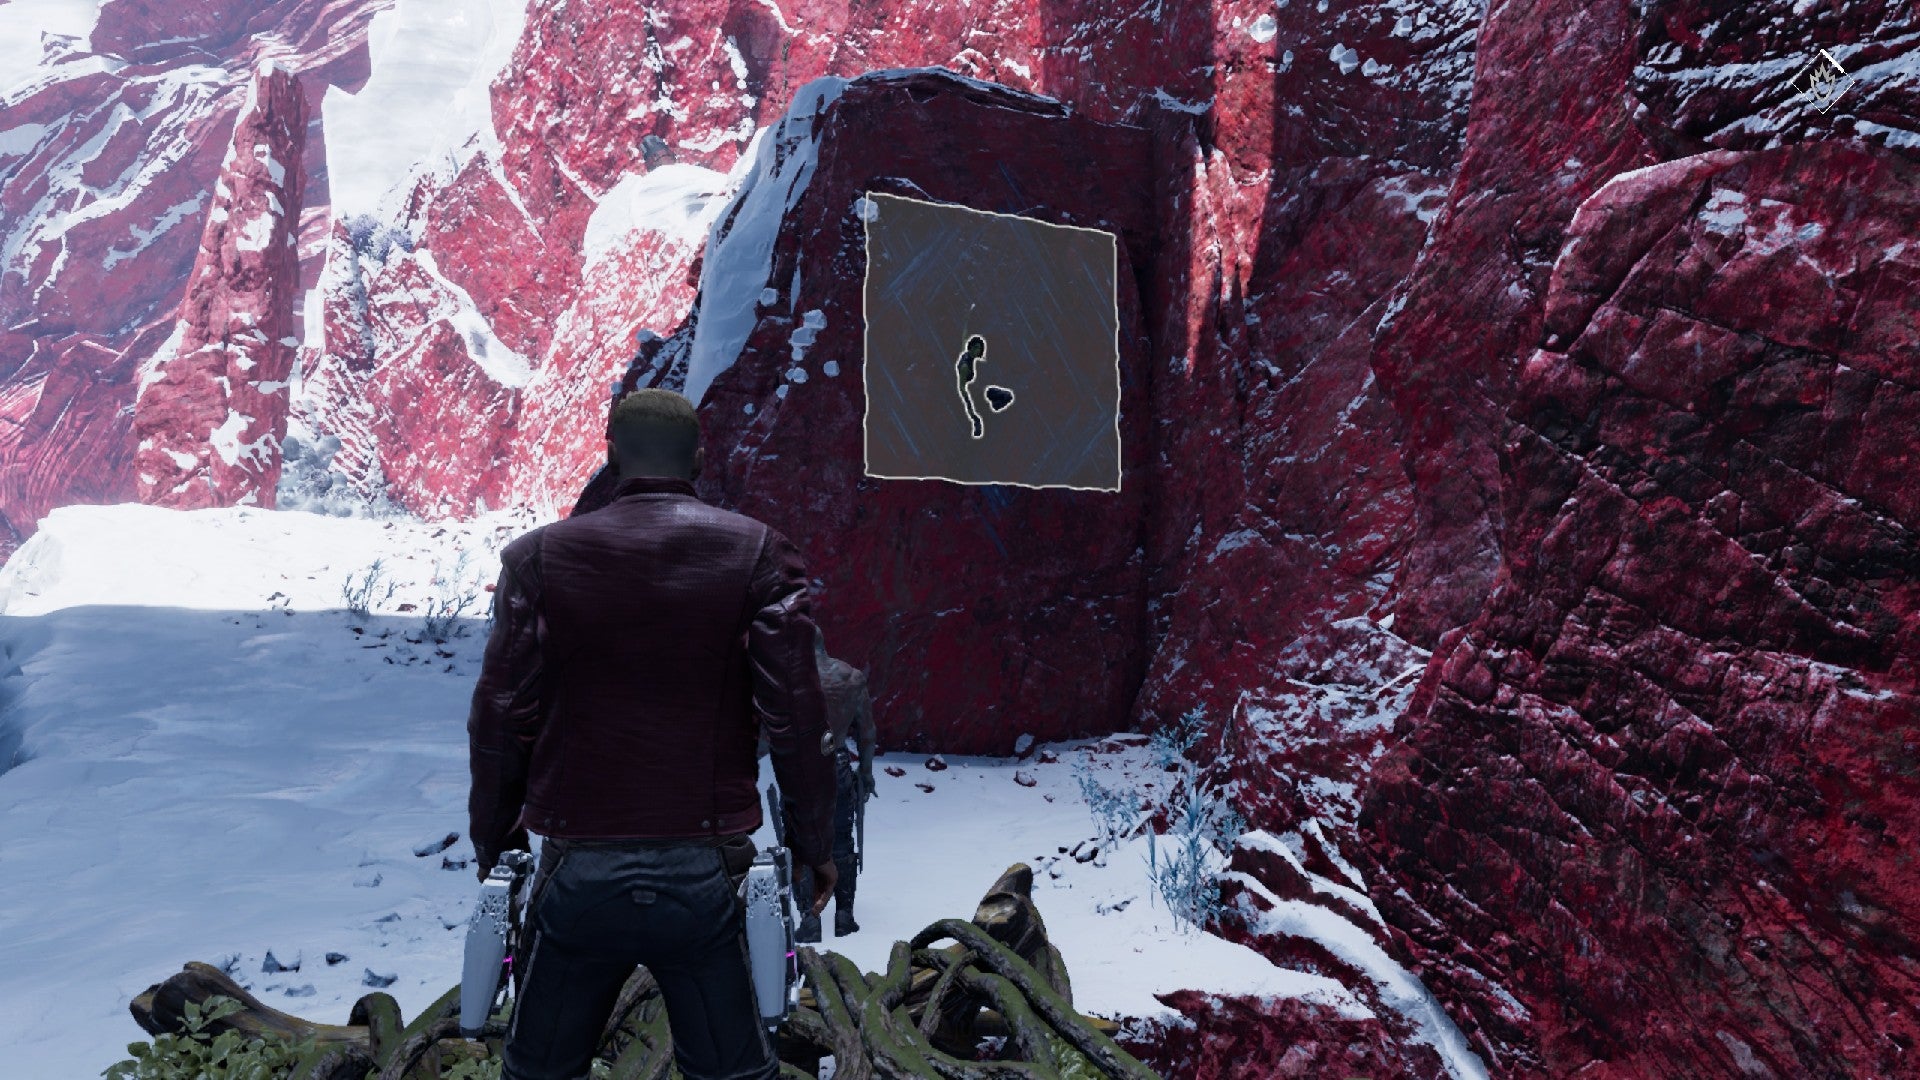 Gamora hangs from a cliff face, Star Lord stands in the snow below. Red mountains surround them